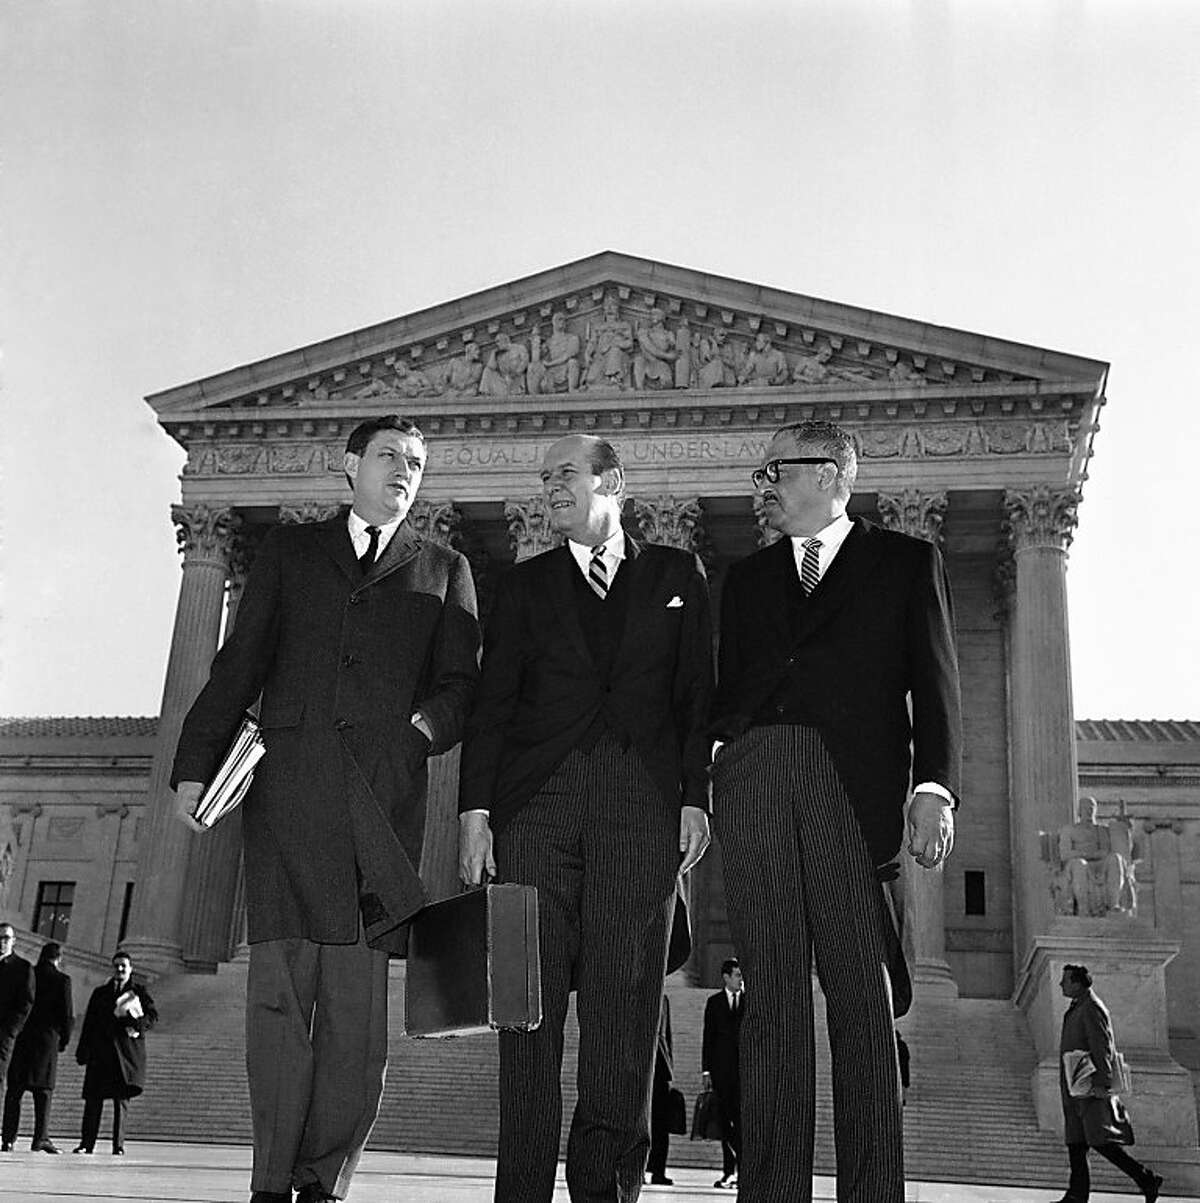 FILE - In this Jan. 17, 1966 file photo, Attorney General Nicholas Katzenbach, center, stands with Solicitor General Thurgood Marshall, left, and Assistant Attorney General John Doar as he arrives at the Supreme Court Building in Washington to defend the legality of the 1965 Voting Rights Act. Katzenbach, who held influential posts in the Kennedy and Johnson administrations and played a prominent, televised role in federal desegregation efforts in the South, died Tuesday, May 8, 2012. He was 90. (AP Photo)